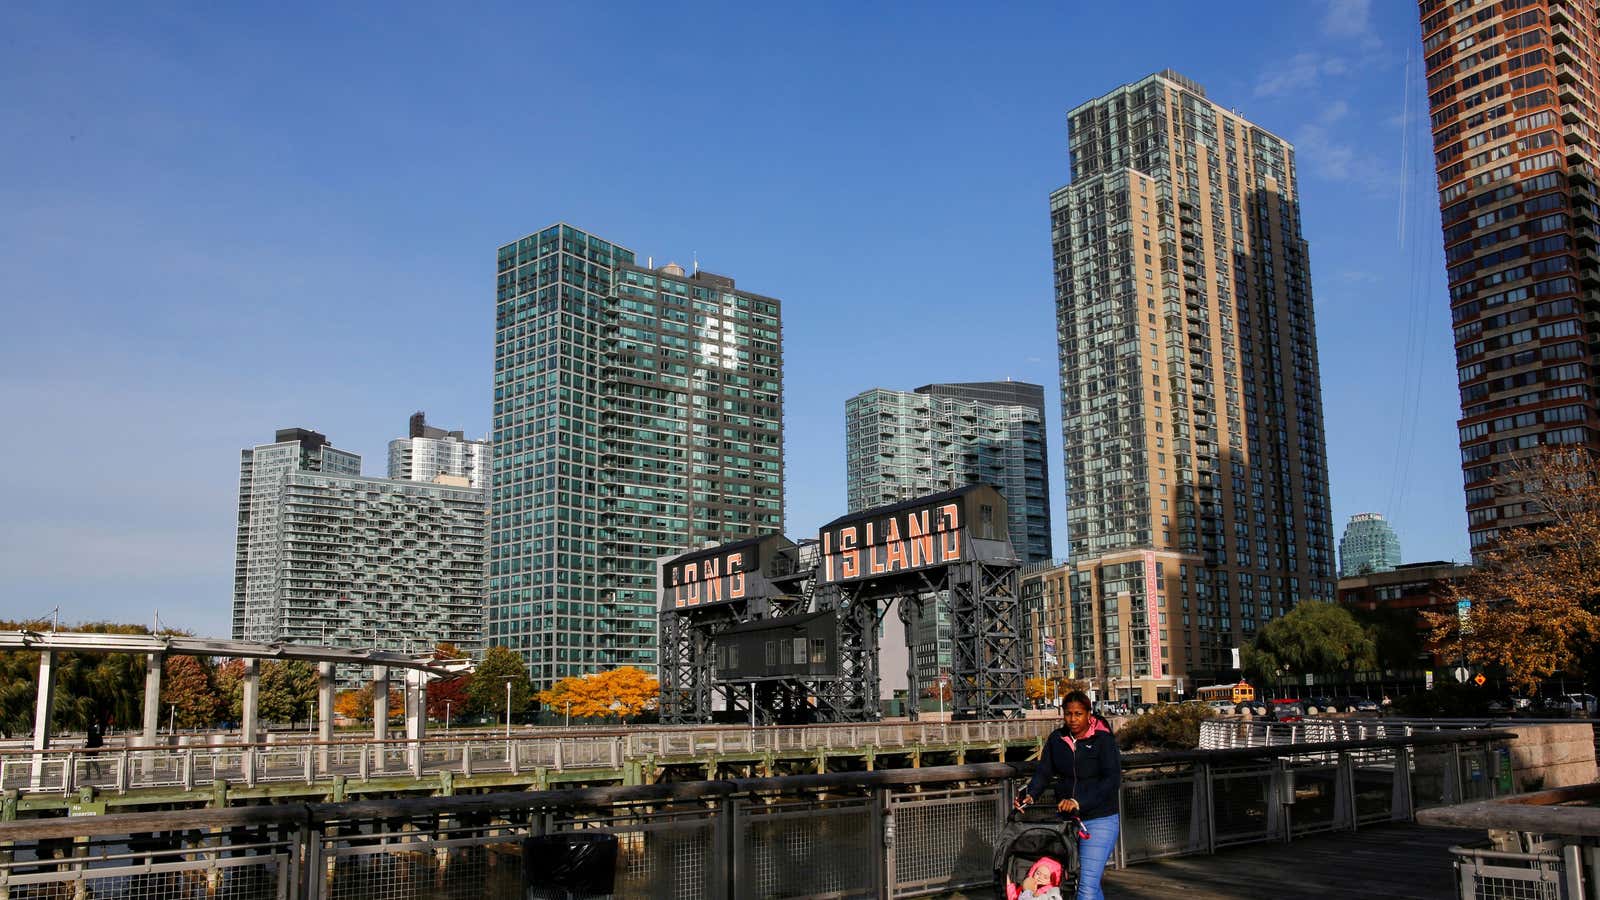 Clear skies over Long Island City—for now.